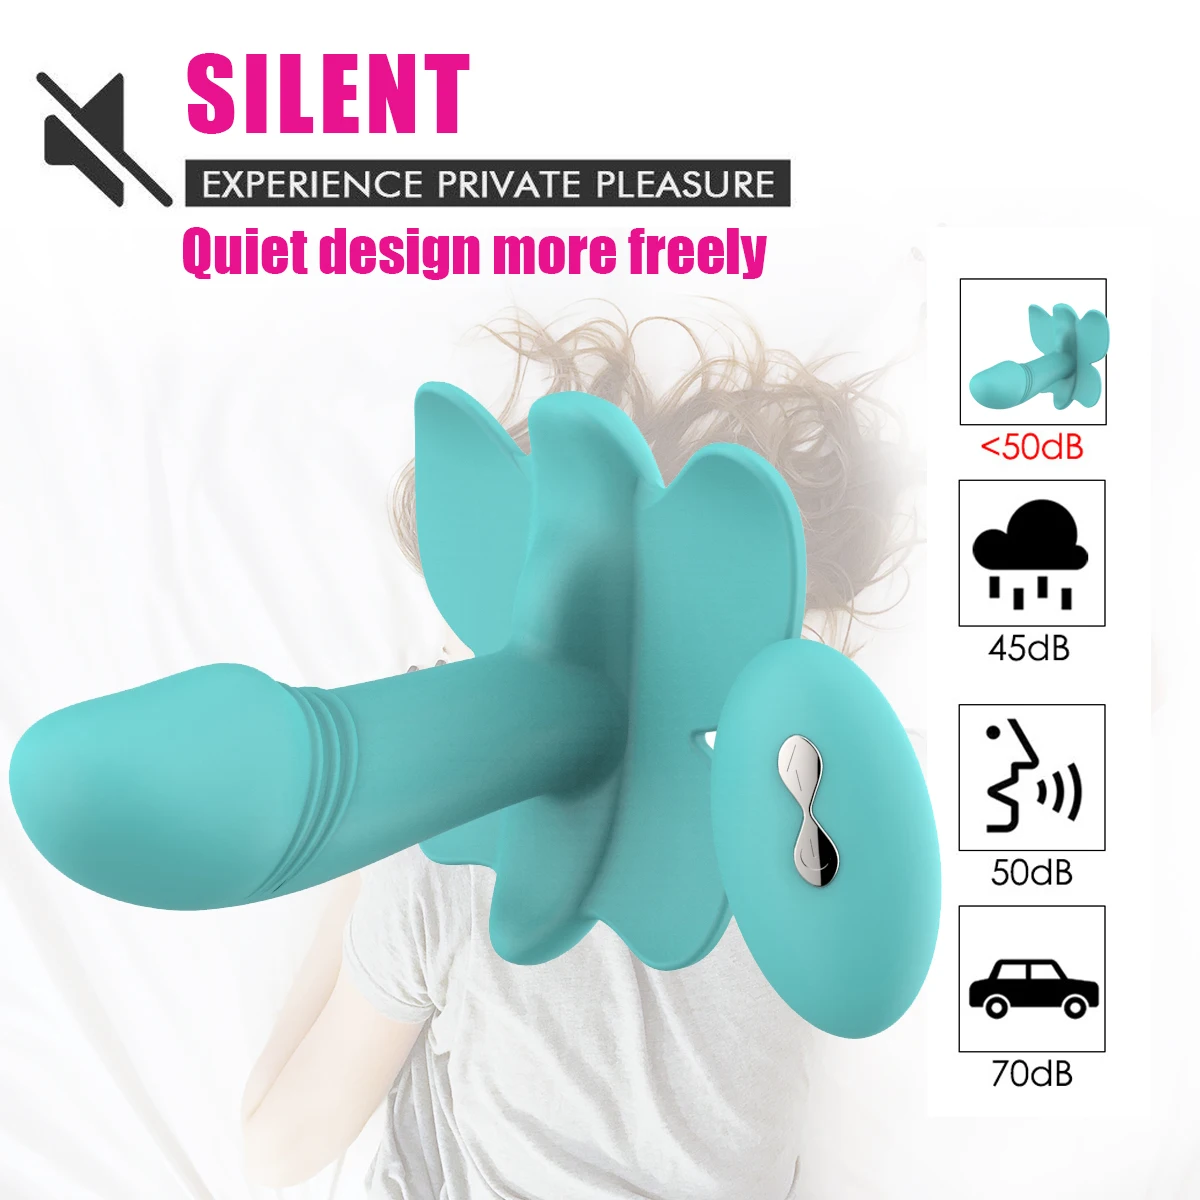 Butterfly Dildo Vibrator for Women Sexy Toy Women's panties Wireless Remote Control Egg Supplies S9a1367fce5974731992fd16e8fe2a62fT